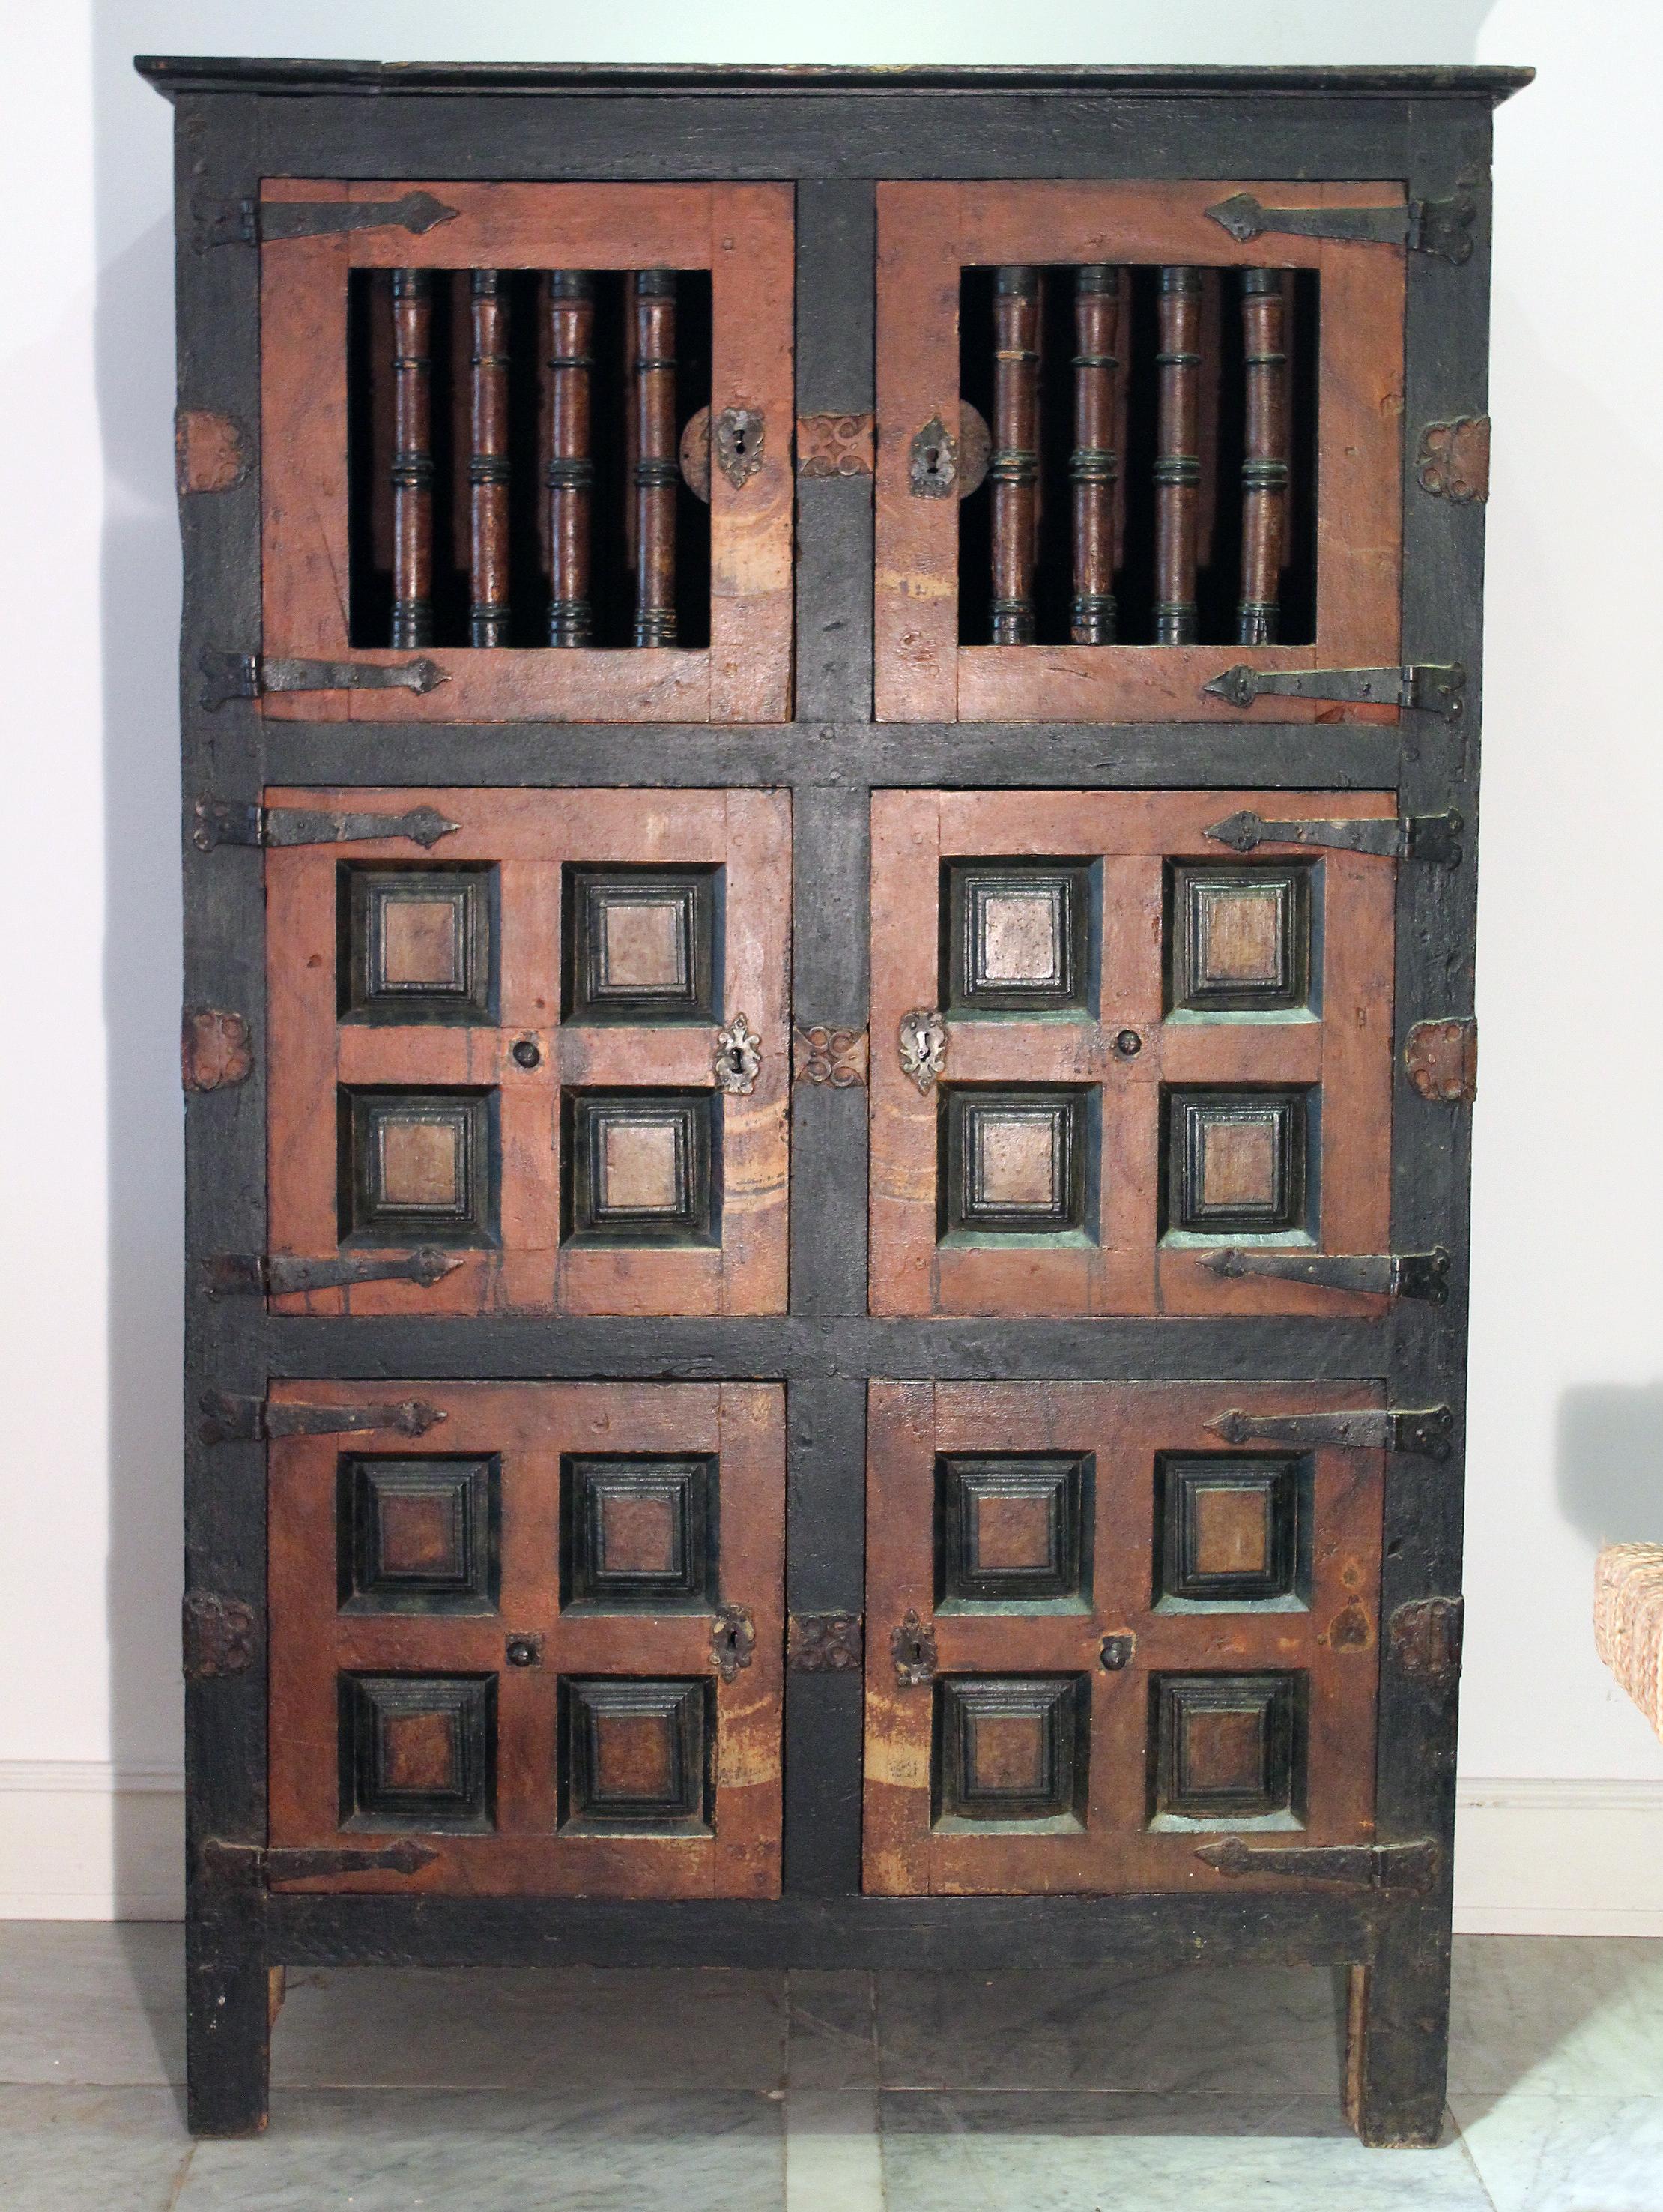 17th century Spanish cabinet with original doors, locks and fittings. Composed of hand painted coffered side panels and front doors, where the top two are use bars instead. This type of cabinets were hand made in Valladolid, 300 km north of